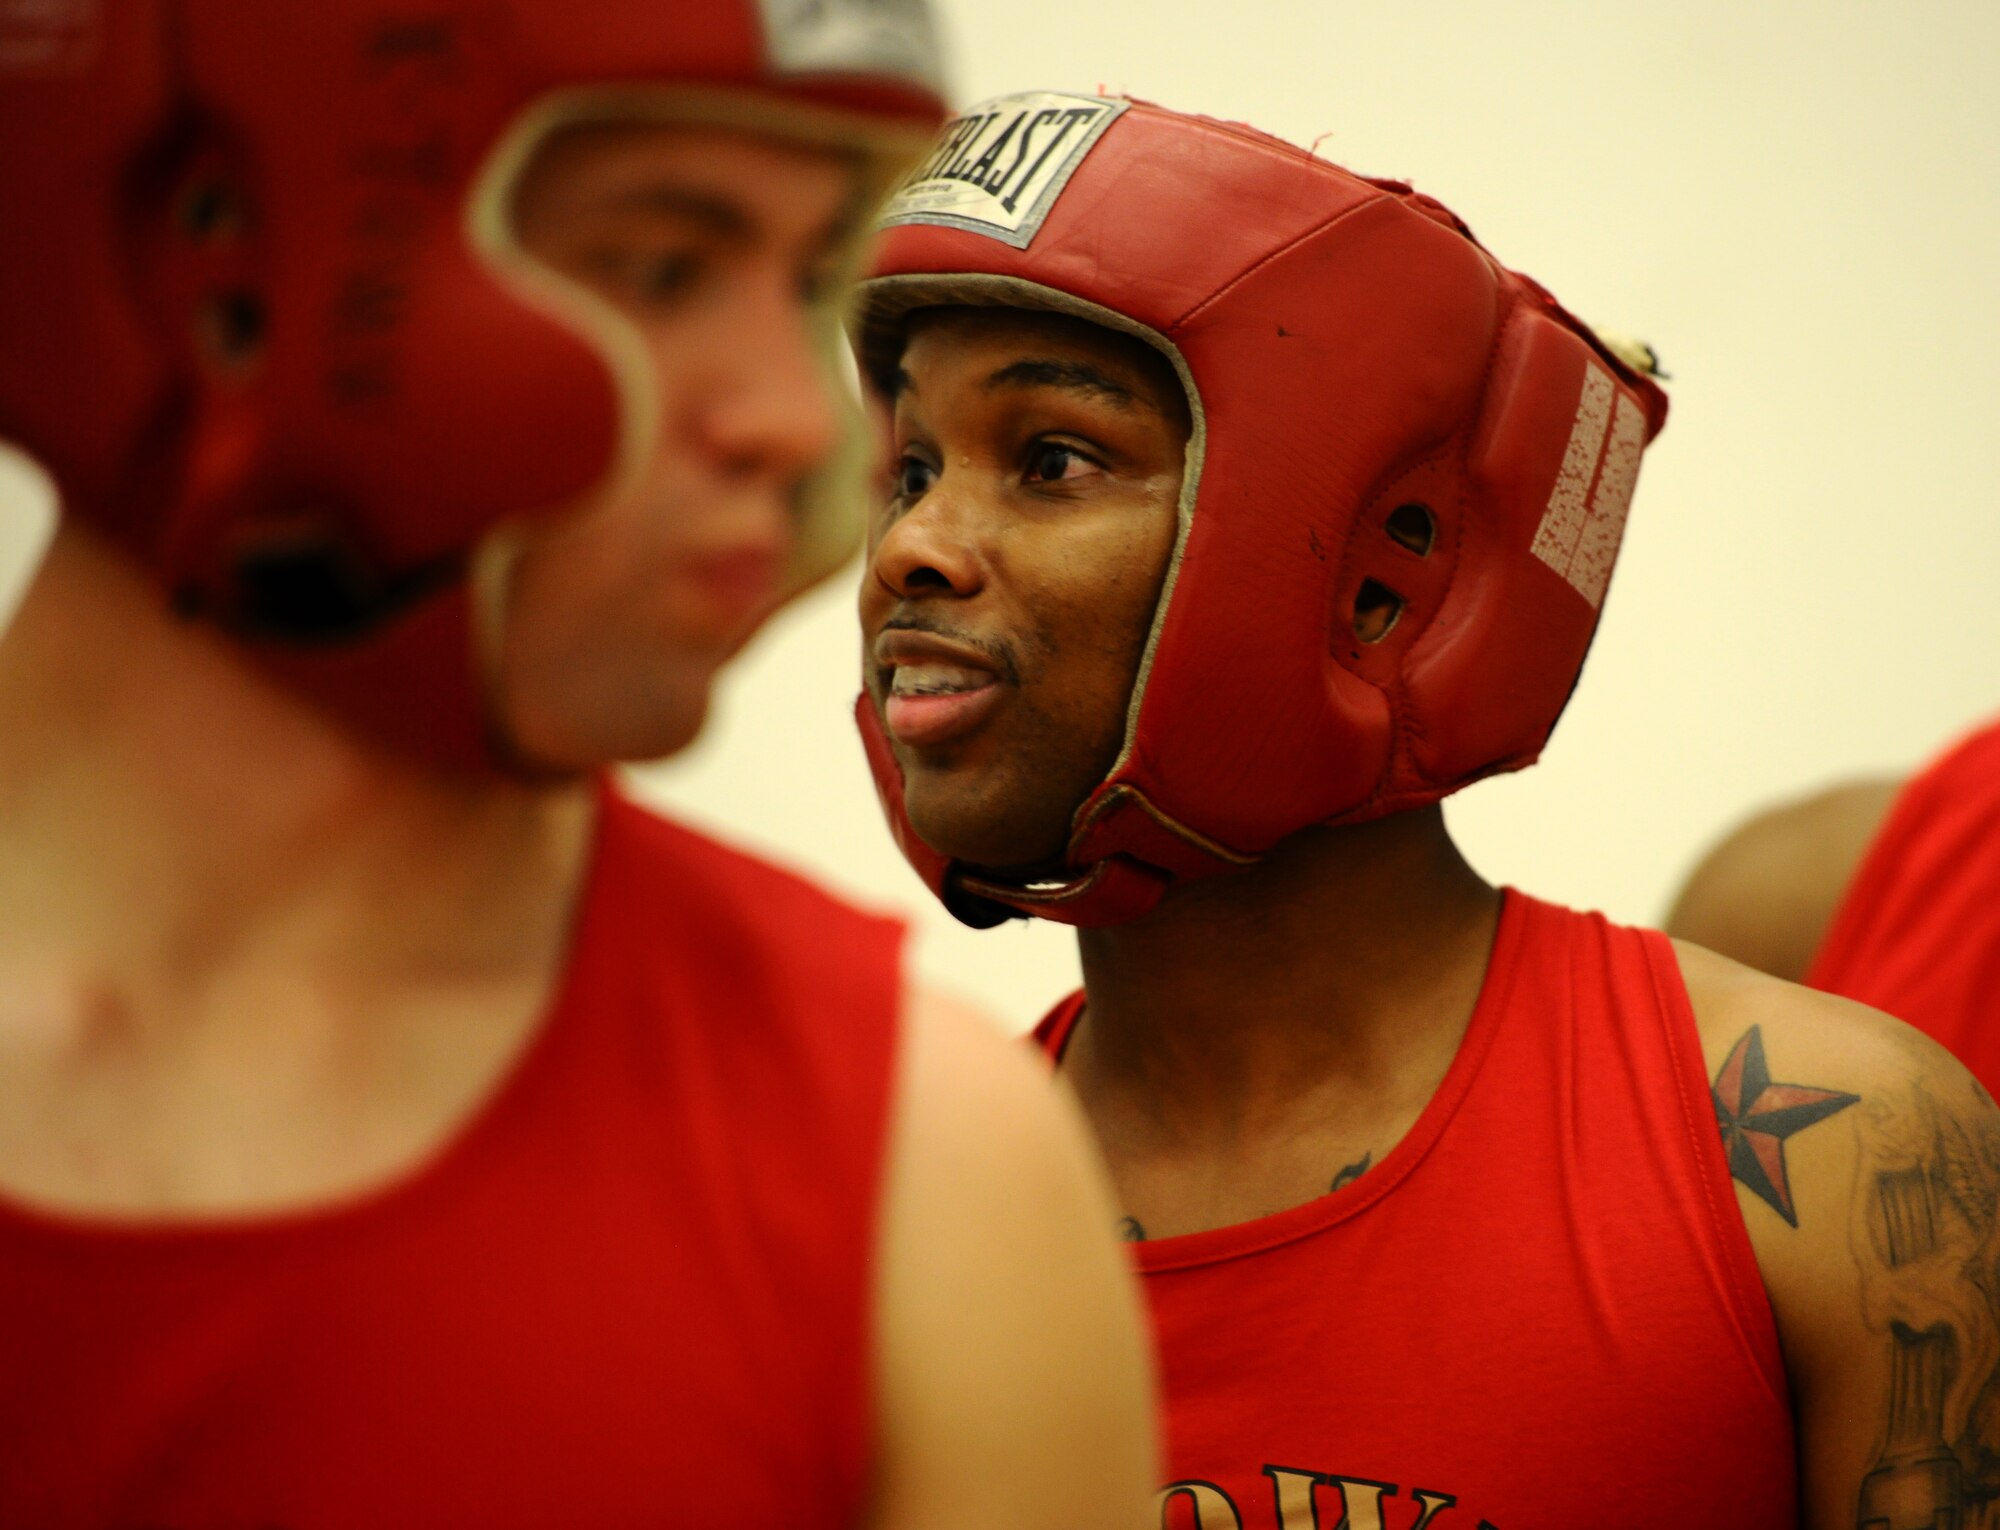 MIESAU, Germany – Senior Airman Ronreco Smith, 52nd Communications Squadron, stands in line before his bout against Senior Airman Kevin Shields, 786th Civil Engineer Squadron, Ramstein Air Base, at the U.S. Army Installation Management Command-Europe Boxing Invitational here June 23. Smith participated in his first boxing match at the event and earned his first victory over Shields. (U.S. Air Force photo by Staff Sgt. Nathanael Callon/Released)